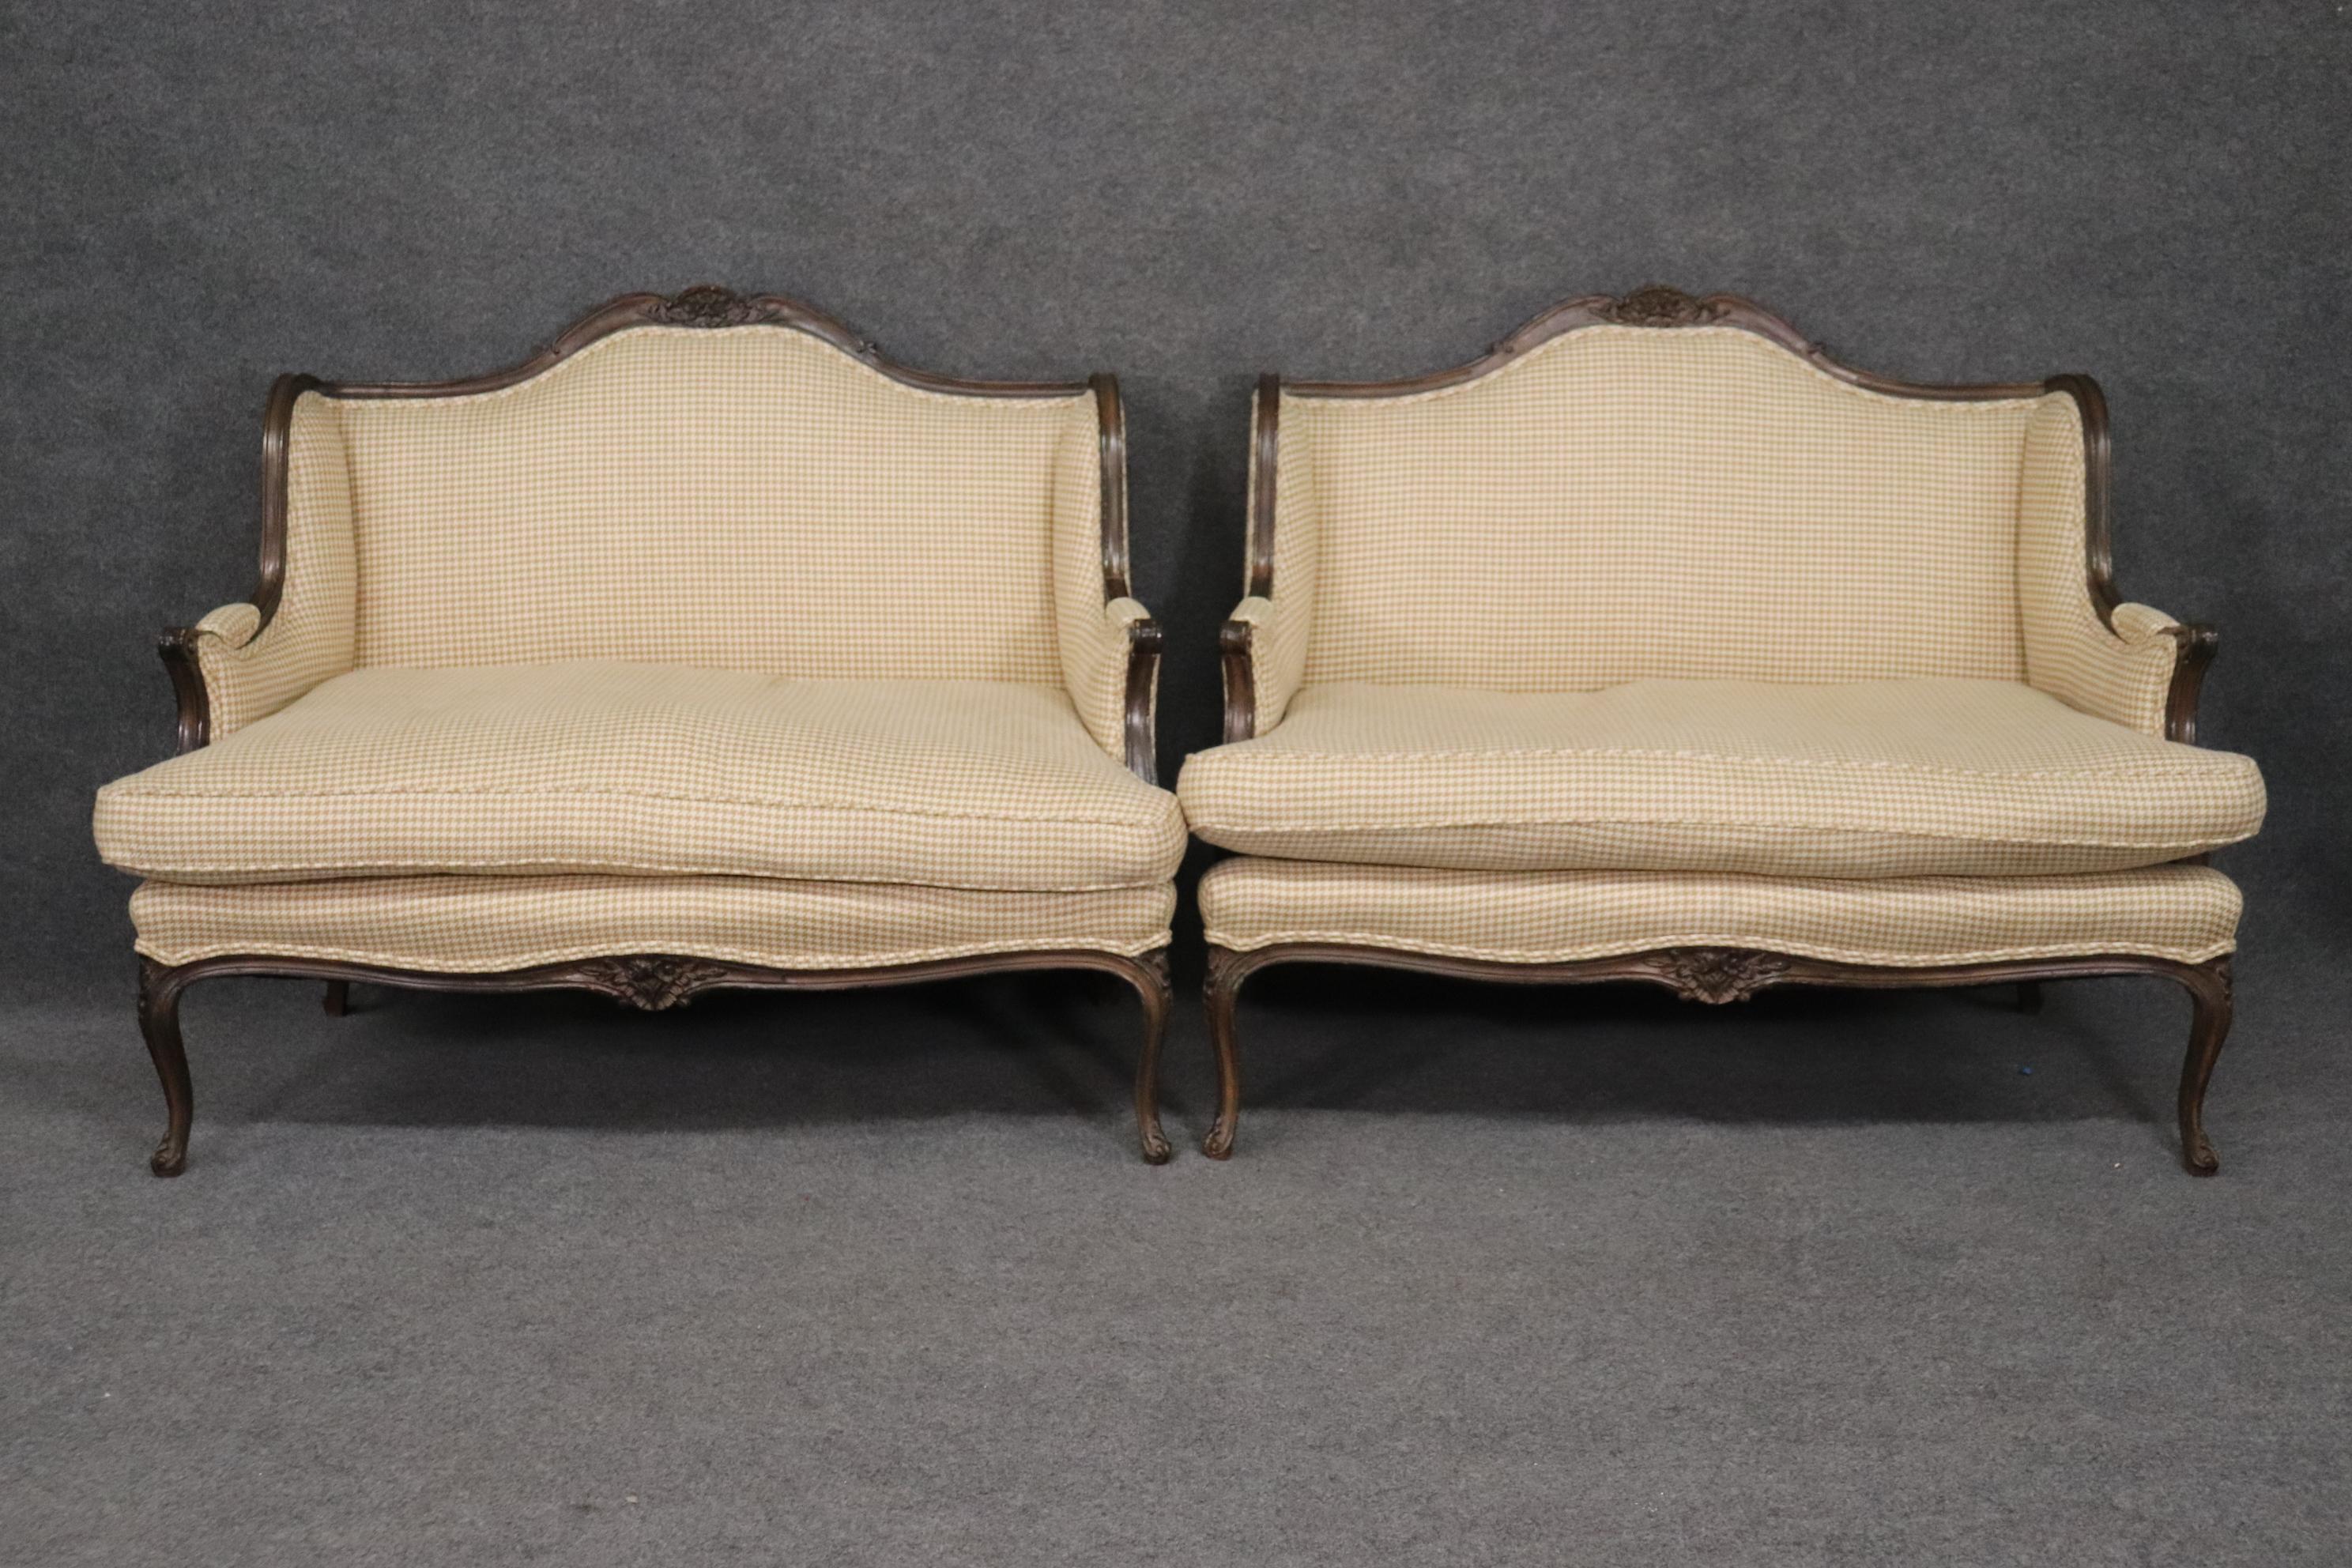 Bigger than a large bergere, smaller than a settee, and beautifully scaled for two people, this pair of French Louis XV style marquis are very unique in terms of size and styling. The pair measures 50 wide x 40 tall x 34 deep and the seat height is